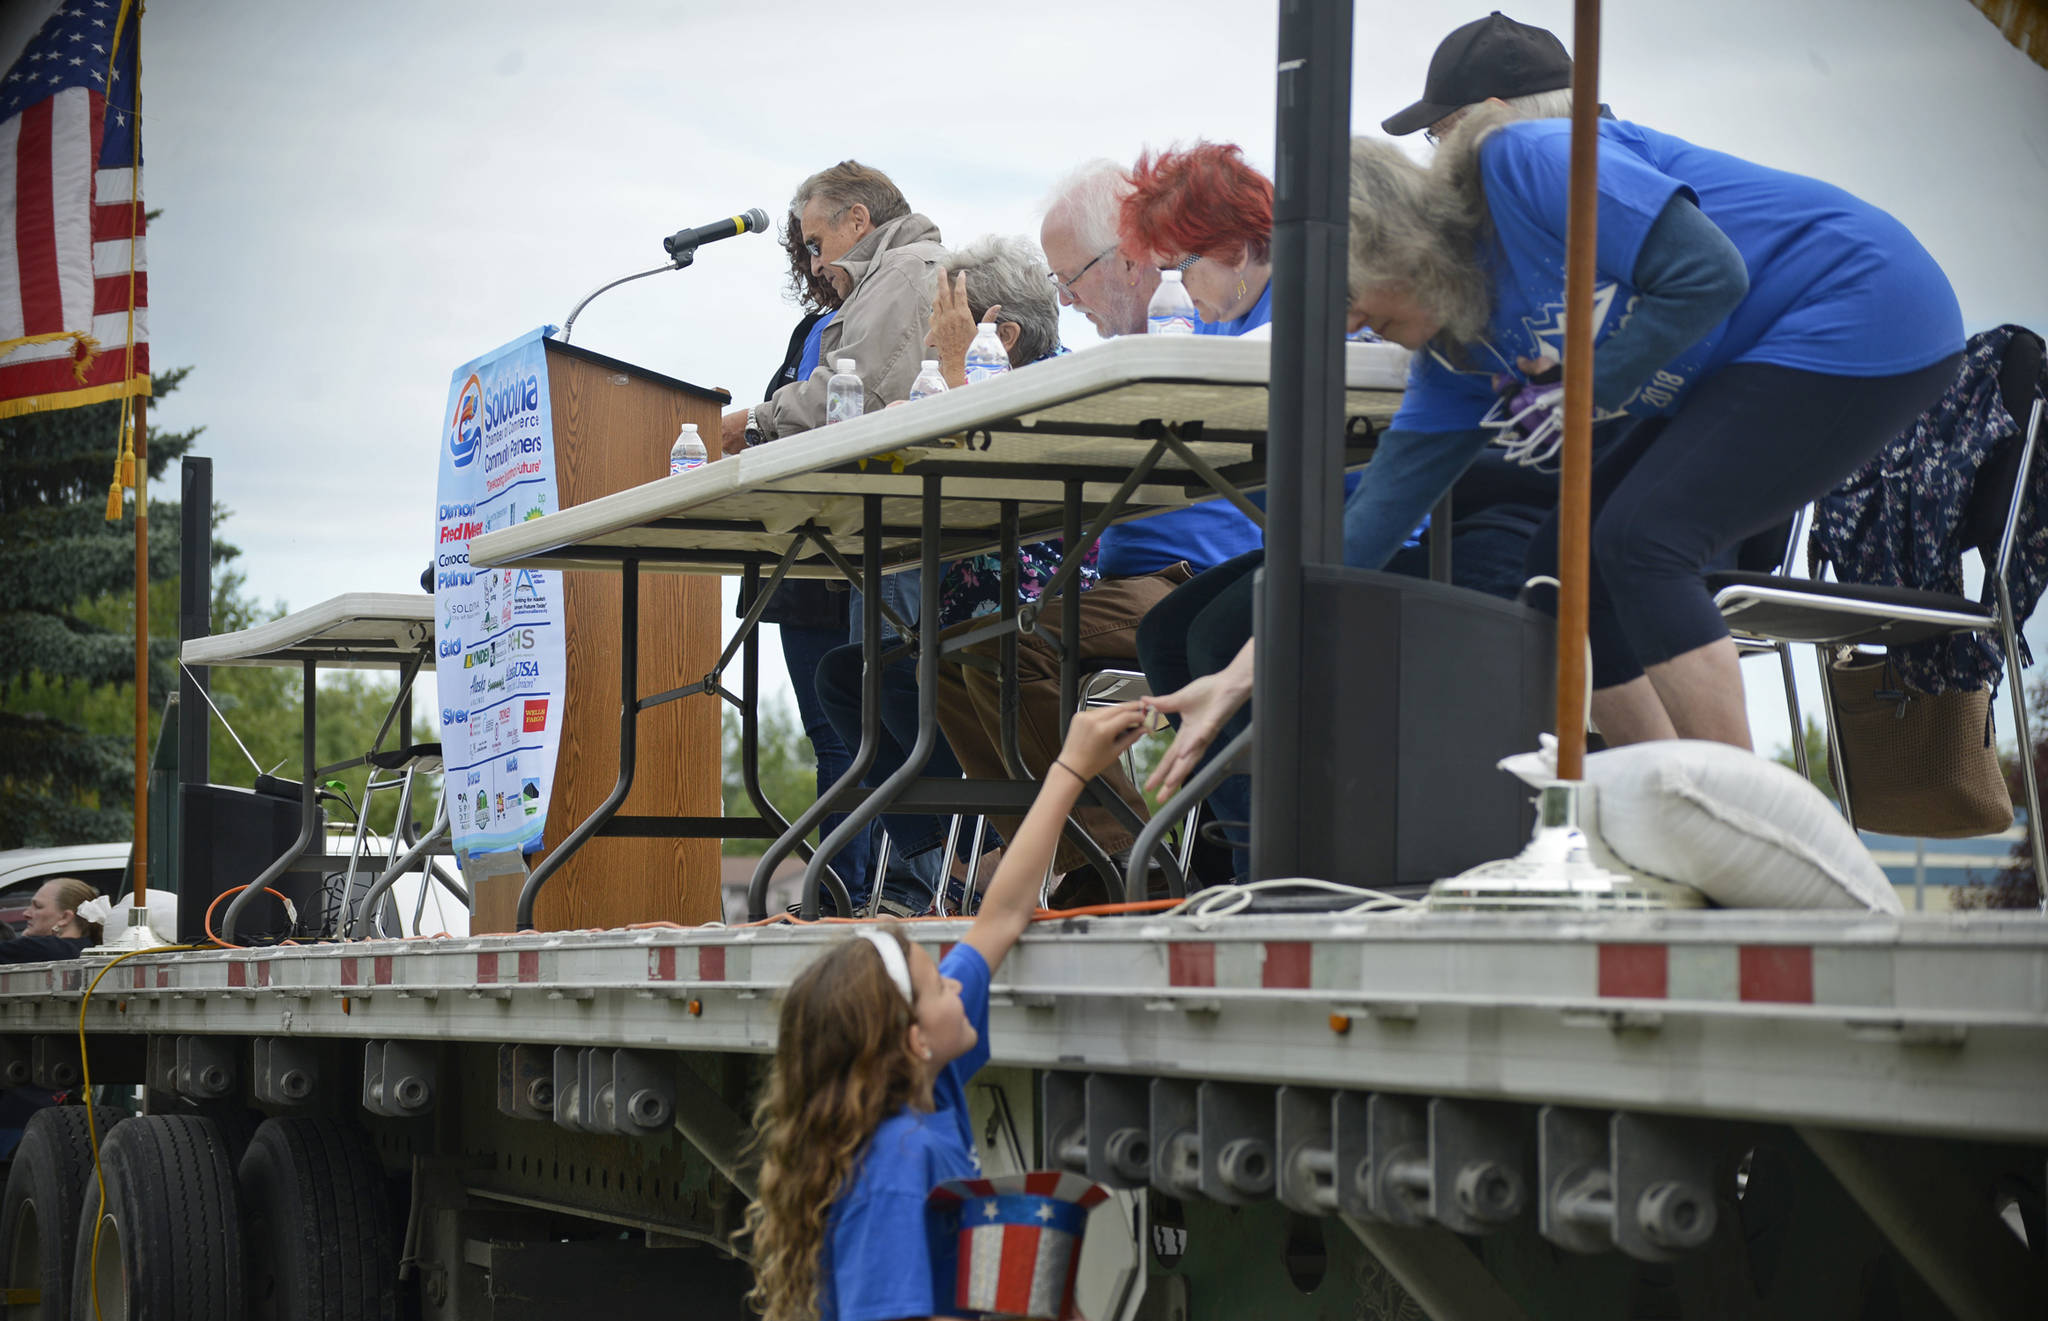 A young Progress Days parade volunteer distributes some candy to the parade judges on Saturday, July 28, 2018 in Soldotna, Alaska. The parade kicks off the weekend-long event celebrating Soldotna’s history, with a market on Saturday and Sunday in Soldotna Creek Park and a concert Saturday night followed by a free community barbecue Sunday. (Photo by Elizabeth Earl/Peninsula Clarion)